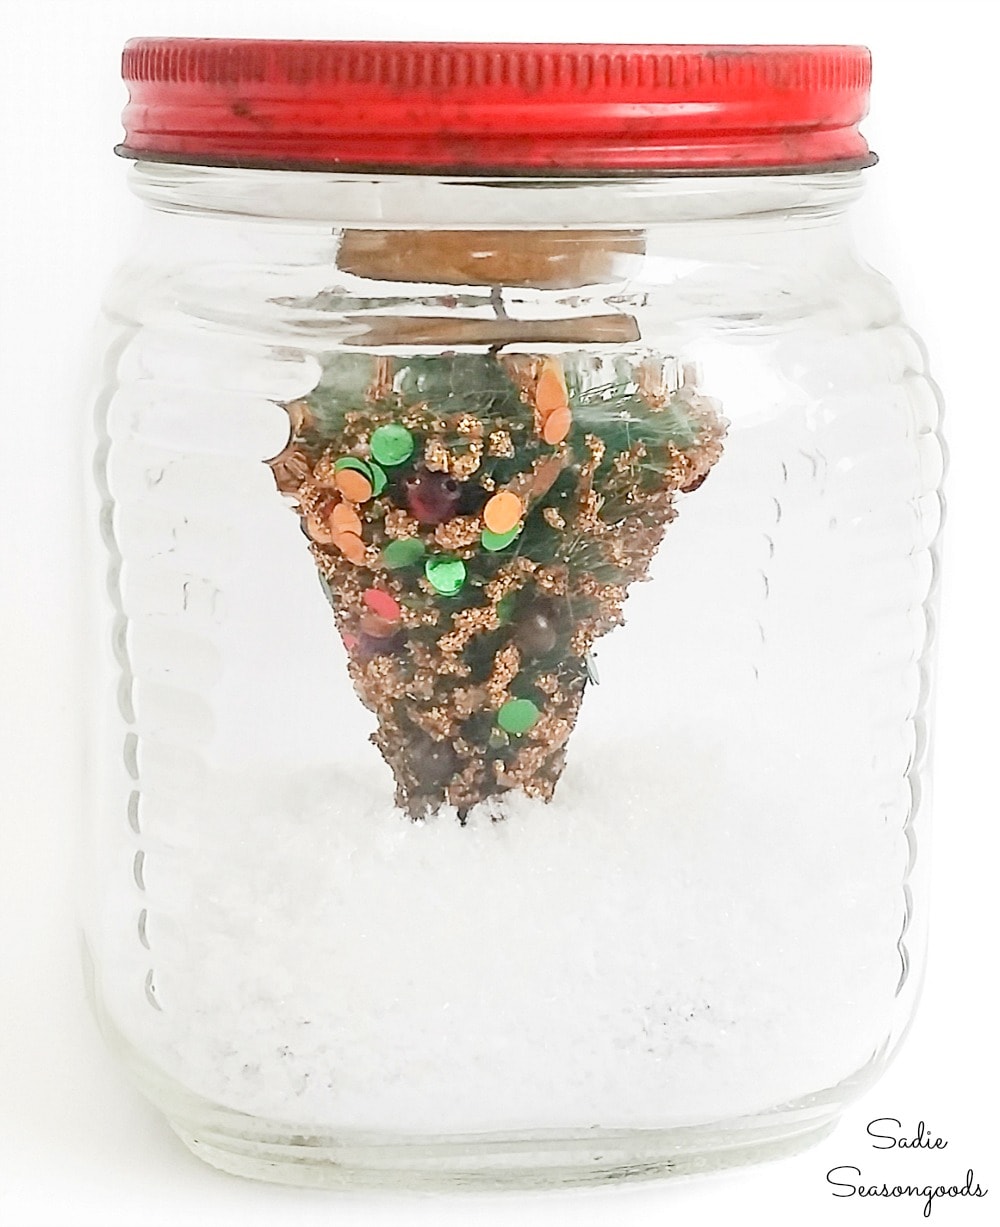 Making a Christmas snow globe with vintage decorations